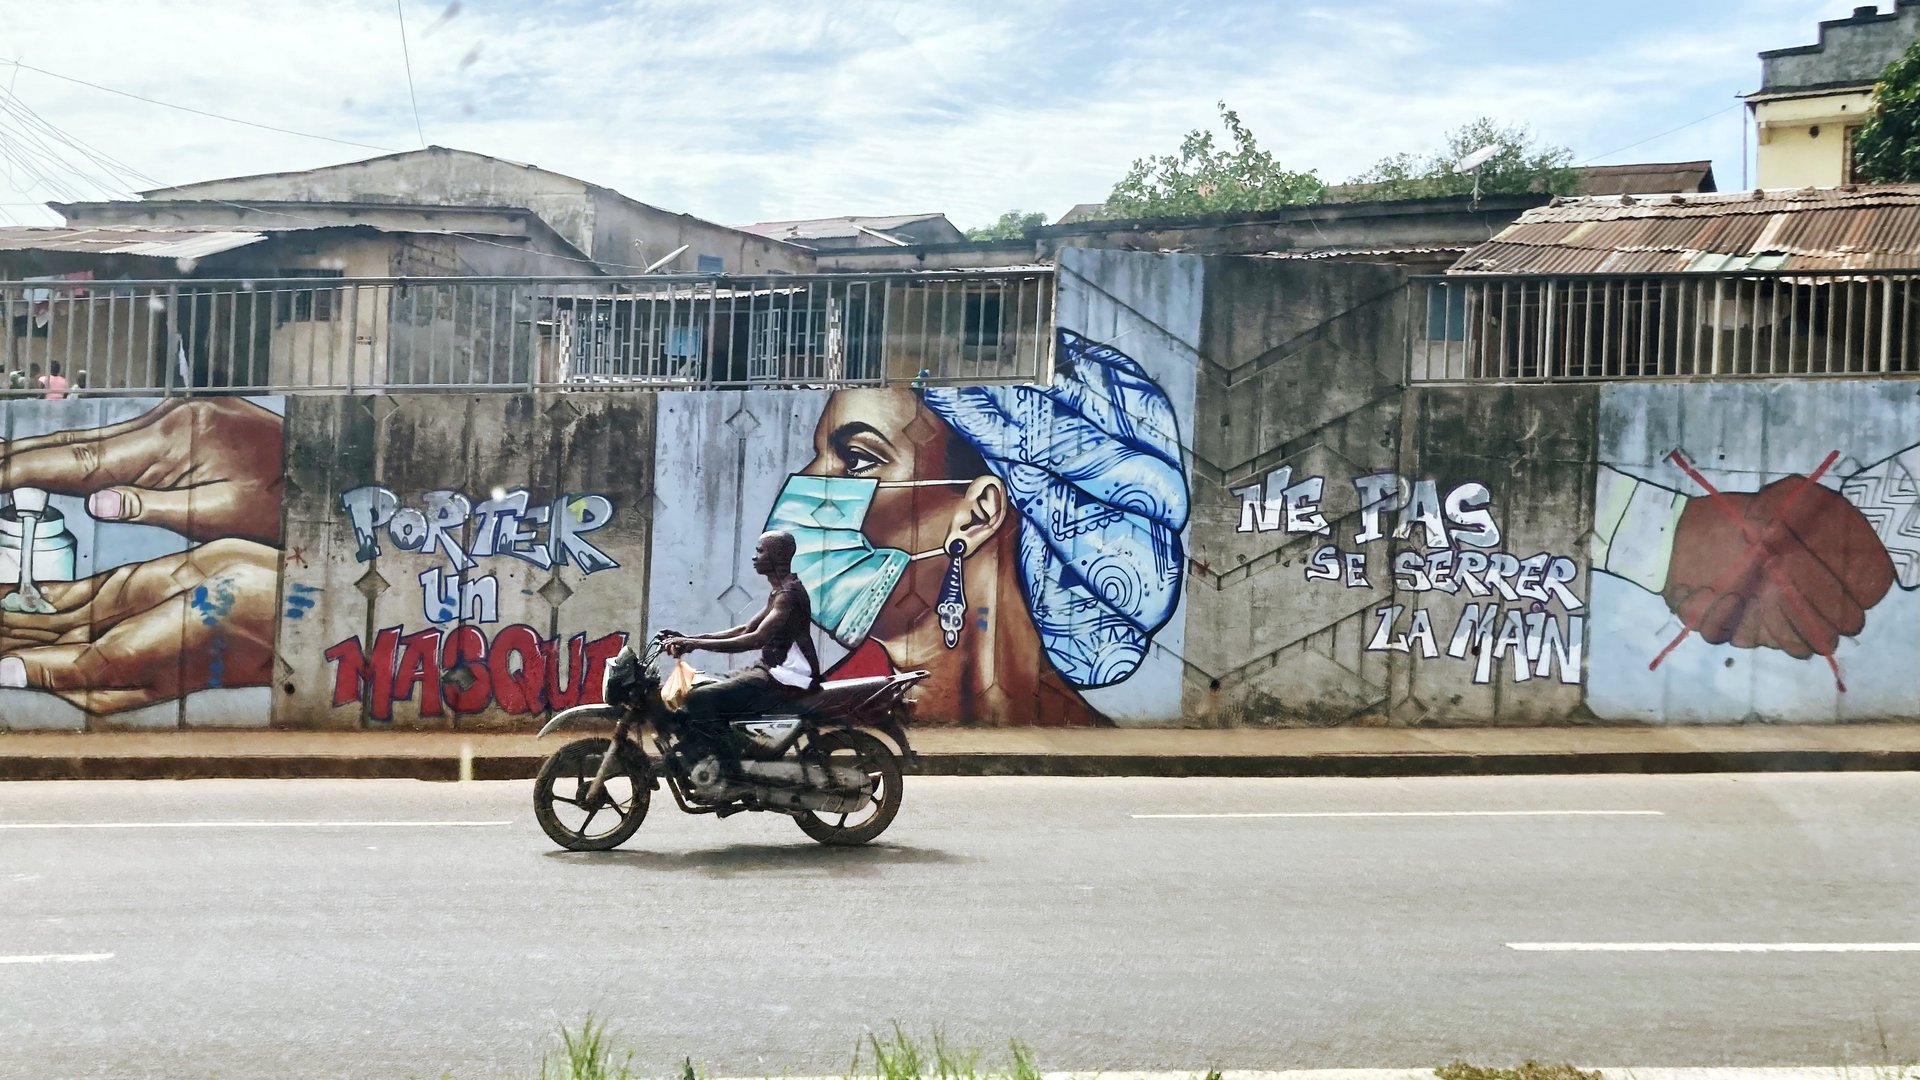 A male Beninese rides a motorbike. Graffiti on the wall behind him says “wear a mask” and “Do not shake hands” in French. Next to that you see illustrations of hands using sanitizer, a female Beninese wearing a mask and a handshake with a red cross over it.